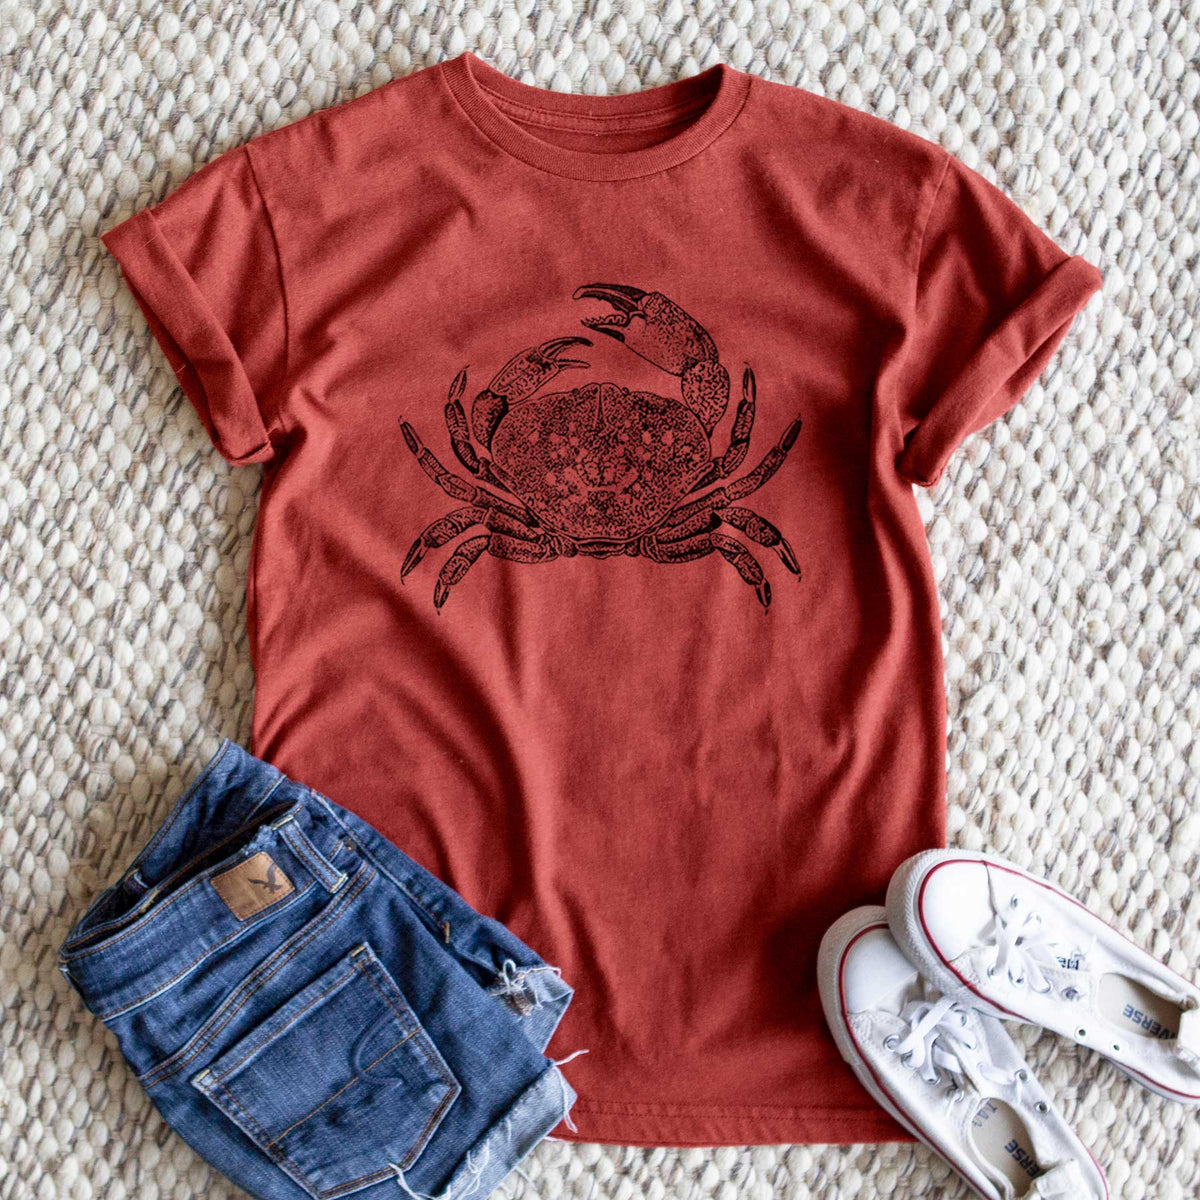 Dungeness Crab - Unisex Recycled Eco Tee  - CLOSEOUT - FINAL SALE